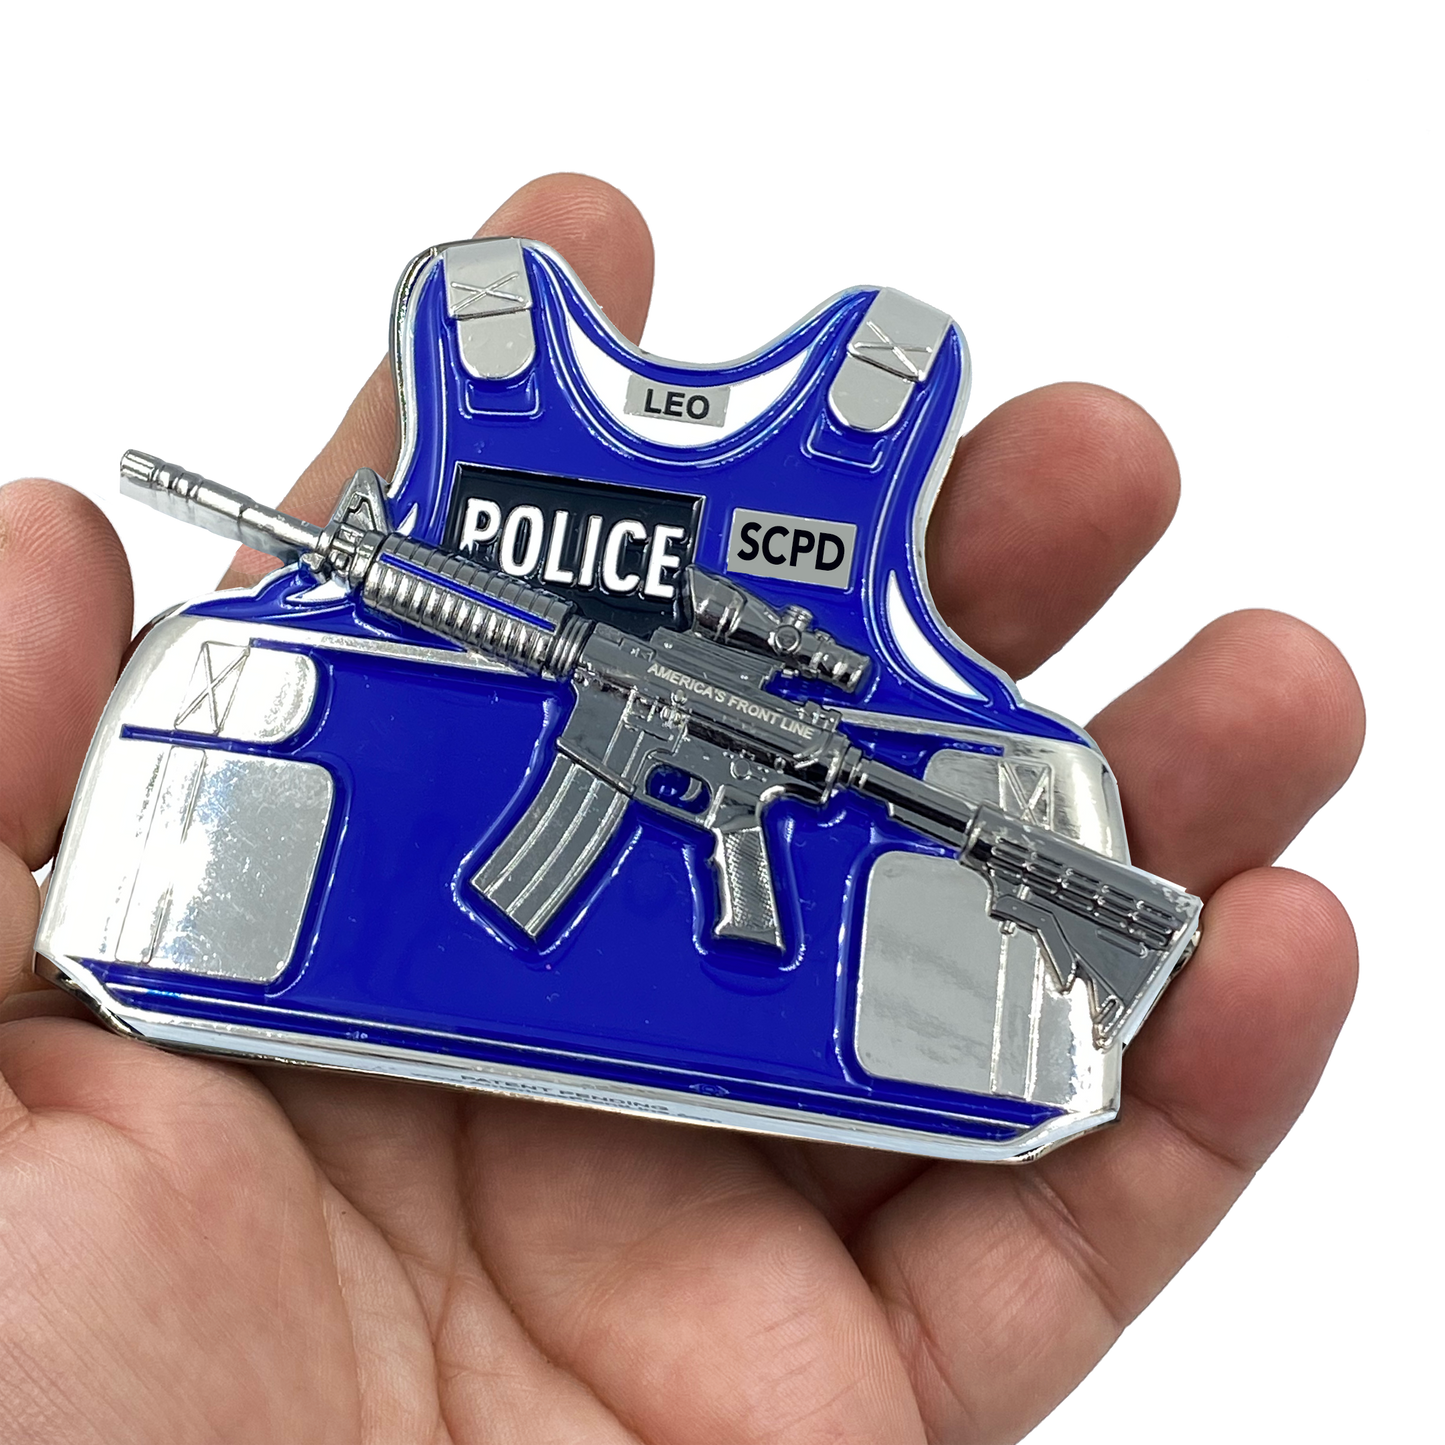 EL5-011 Suffolk County Police Department M4 Body Armor 3D self standing Challenge Coin SCPD LONG ISLAND New York Police Department thin blue line